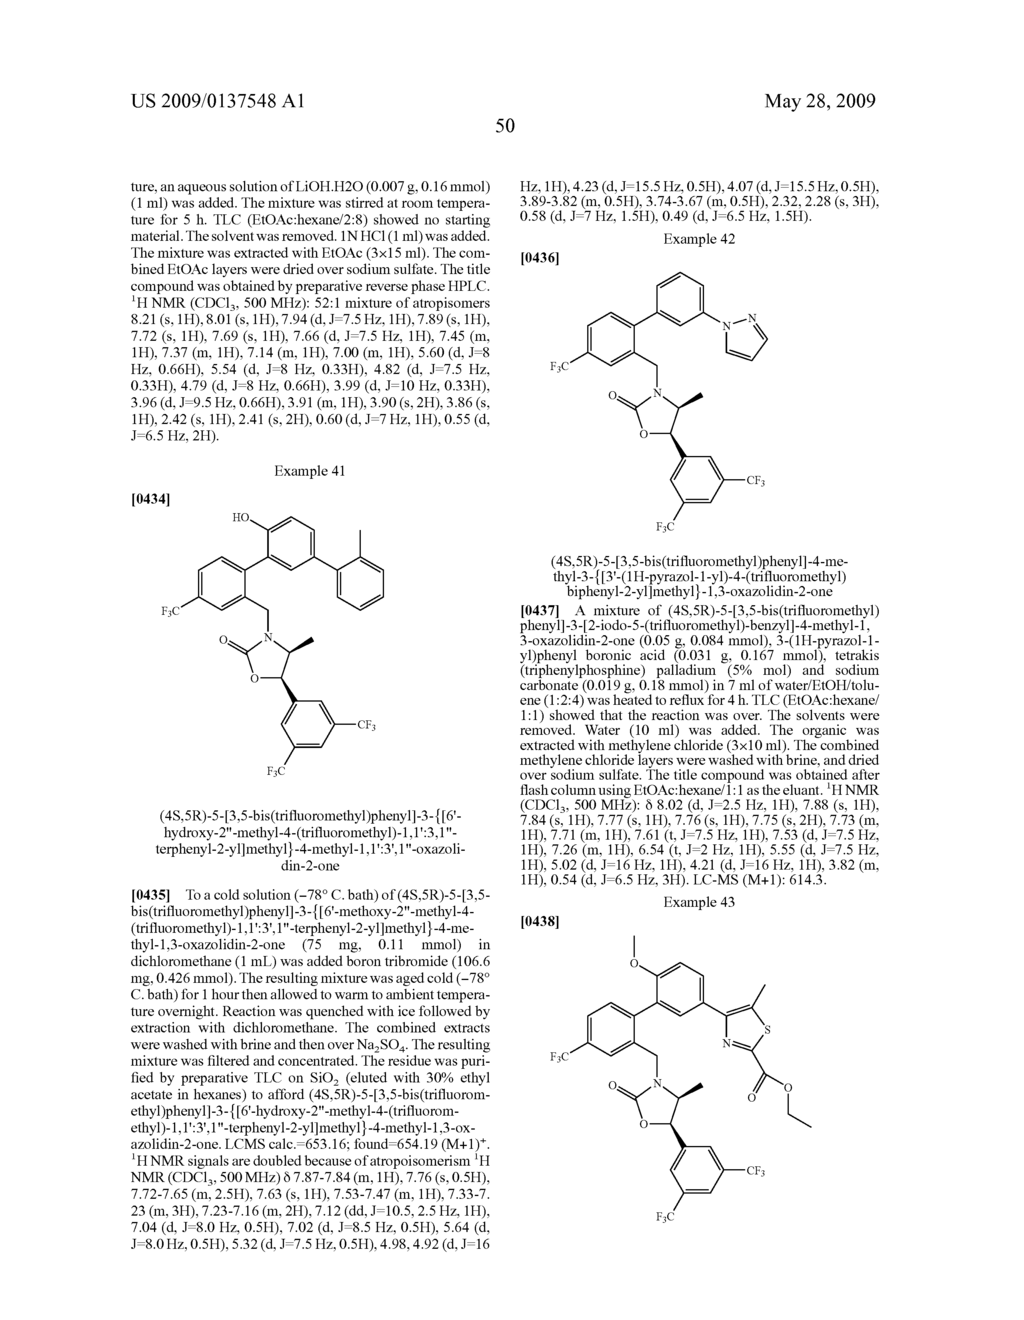 1,3-Oxazolidin-2-One Derivatives Useful as Cetp Inhibitors - diagram, schematic, and image 51